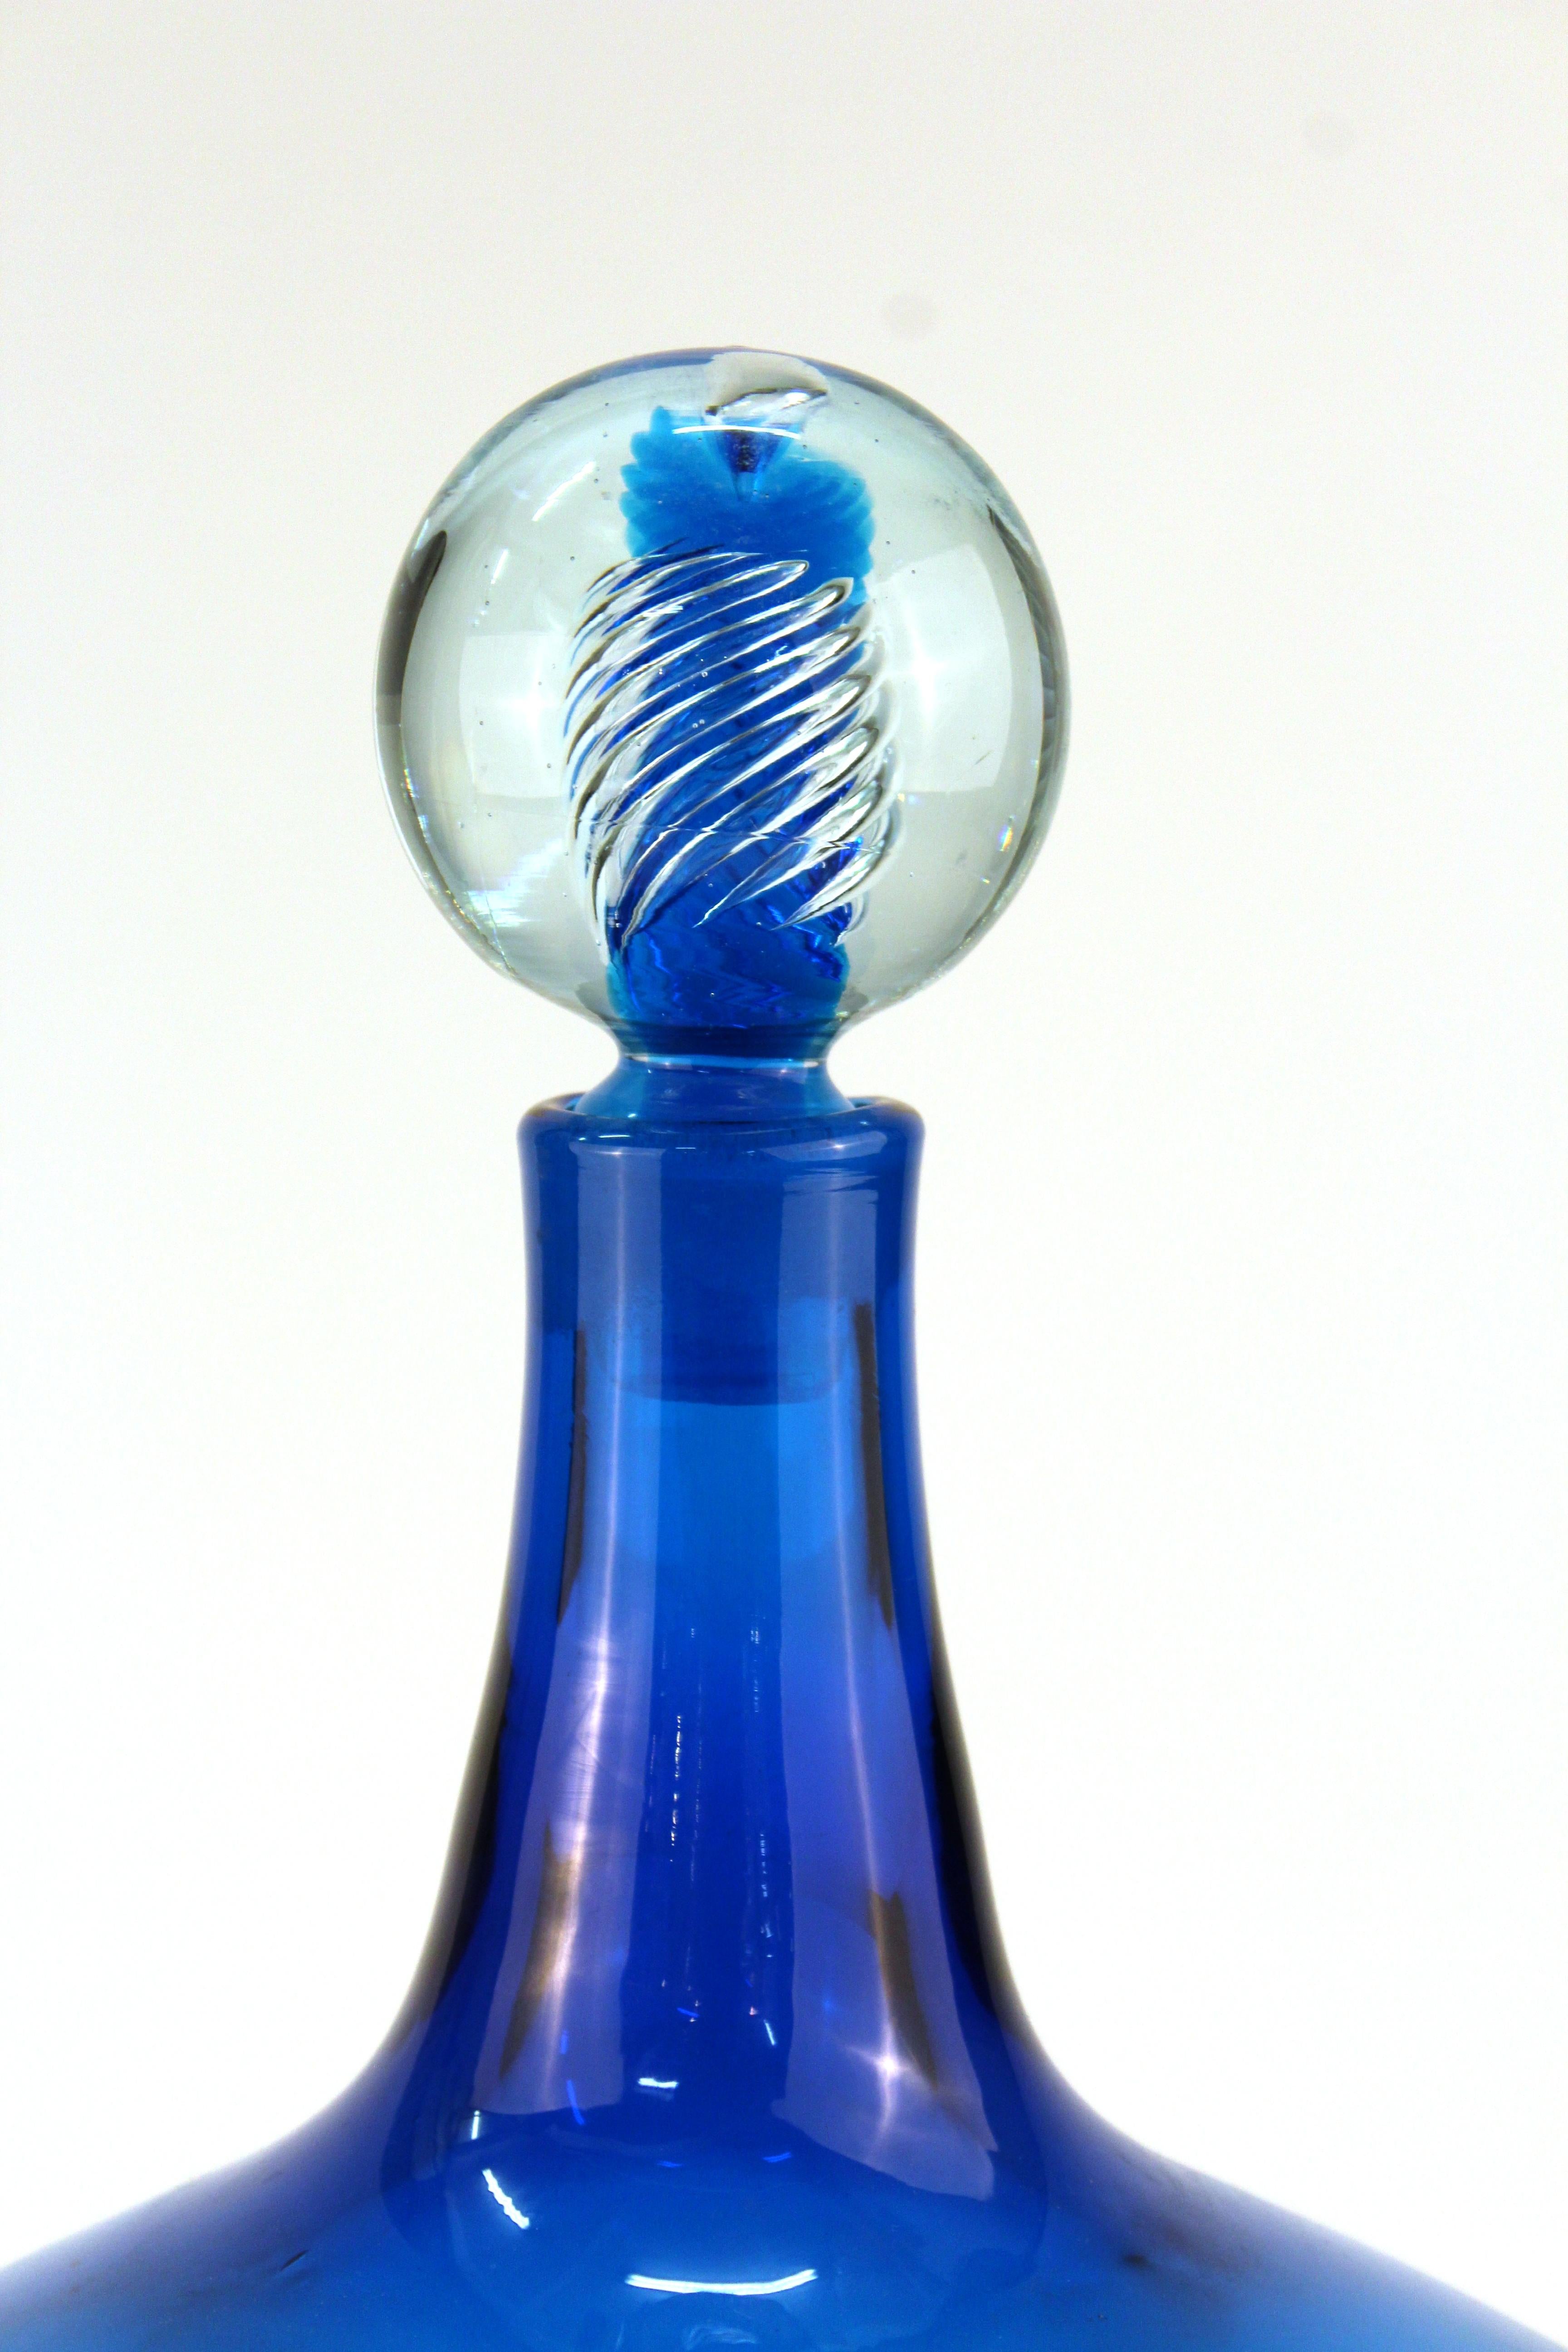 American Mid-Century Modern rare 1970s decanter in cobalt blue glass with an air twist stopper, designed by Joel Myers for Blenko Glass. The piece is in very good condition.